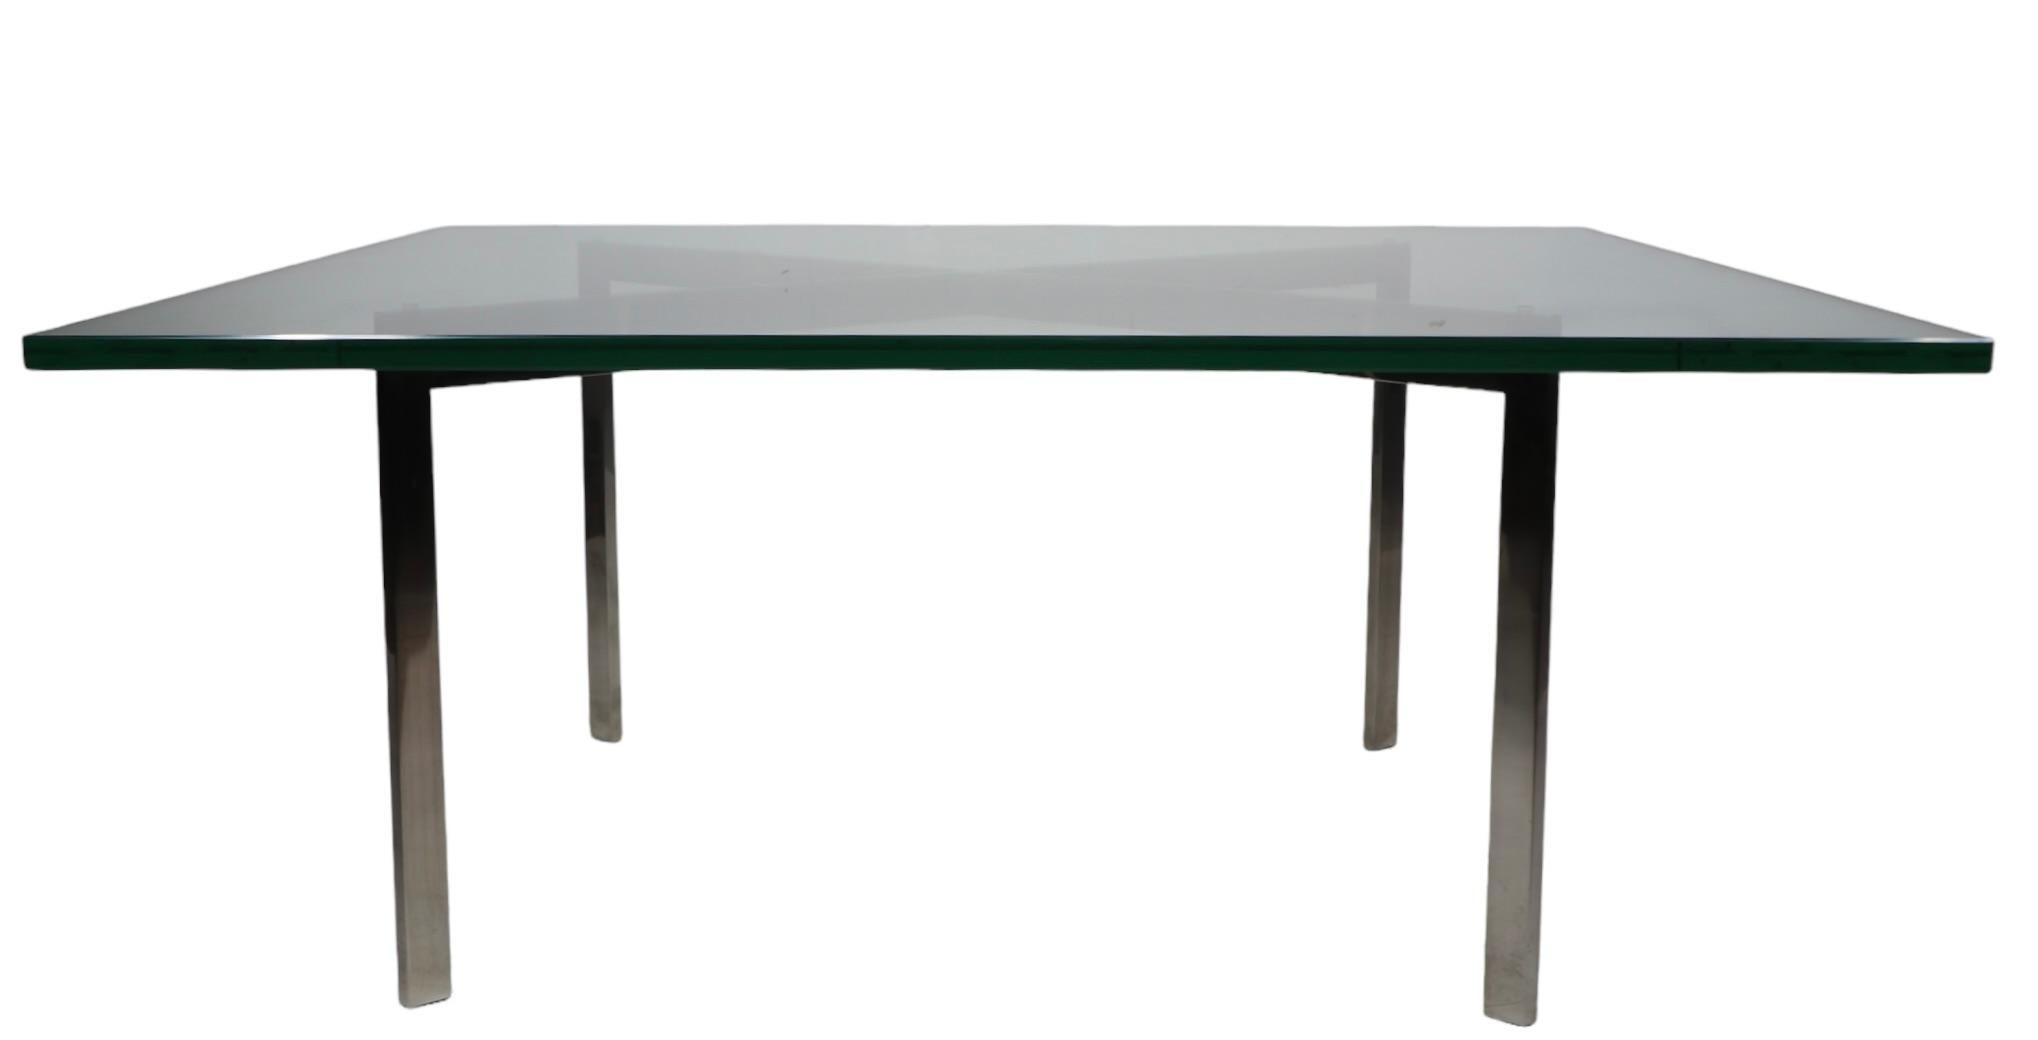 Iconic Barcelona  Modernist coffee table from Mies van der Rohe.  Well crafted, constructed of high quality materials, probably made in Italy, circa 1970's. This example is in excellent, original, clean and ready to use condition, surprisingly even